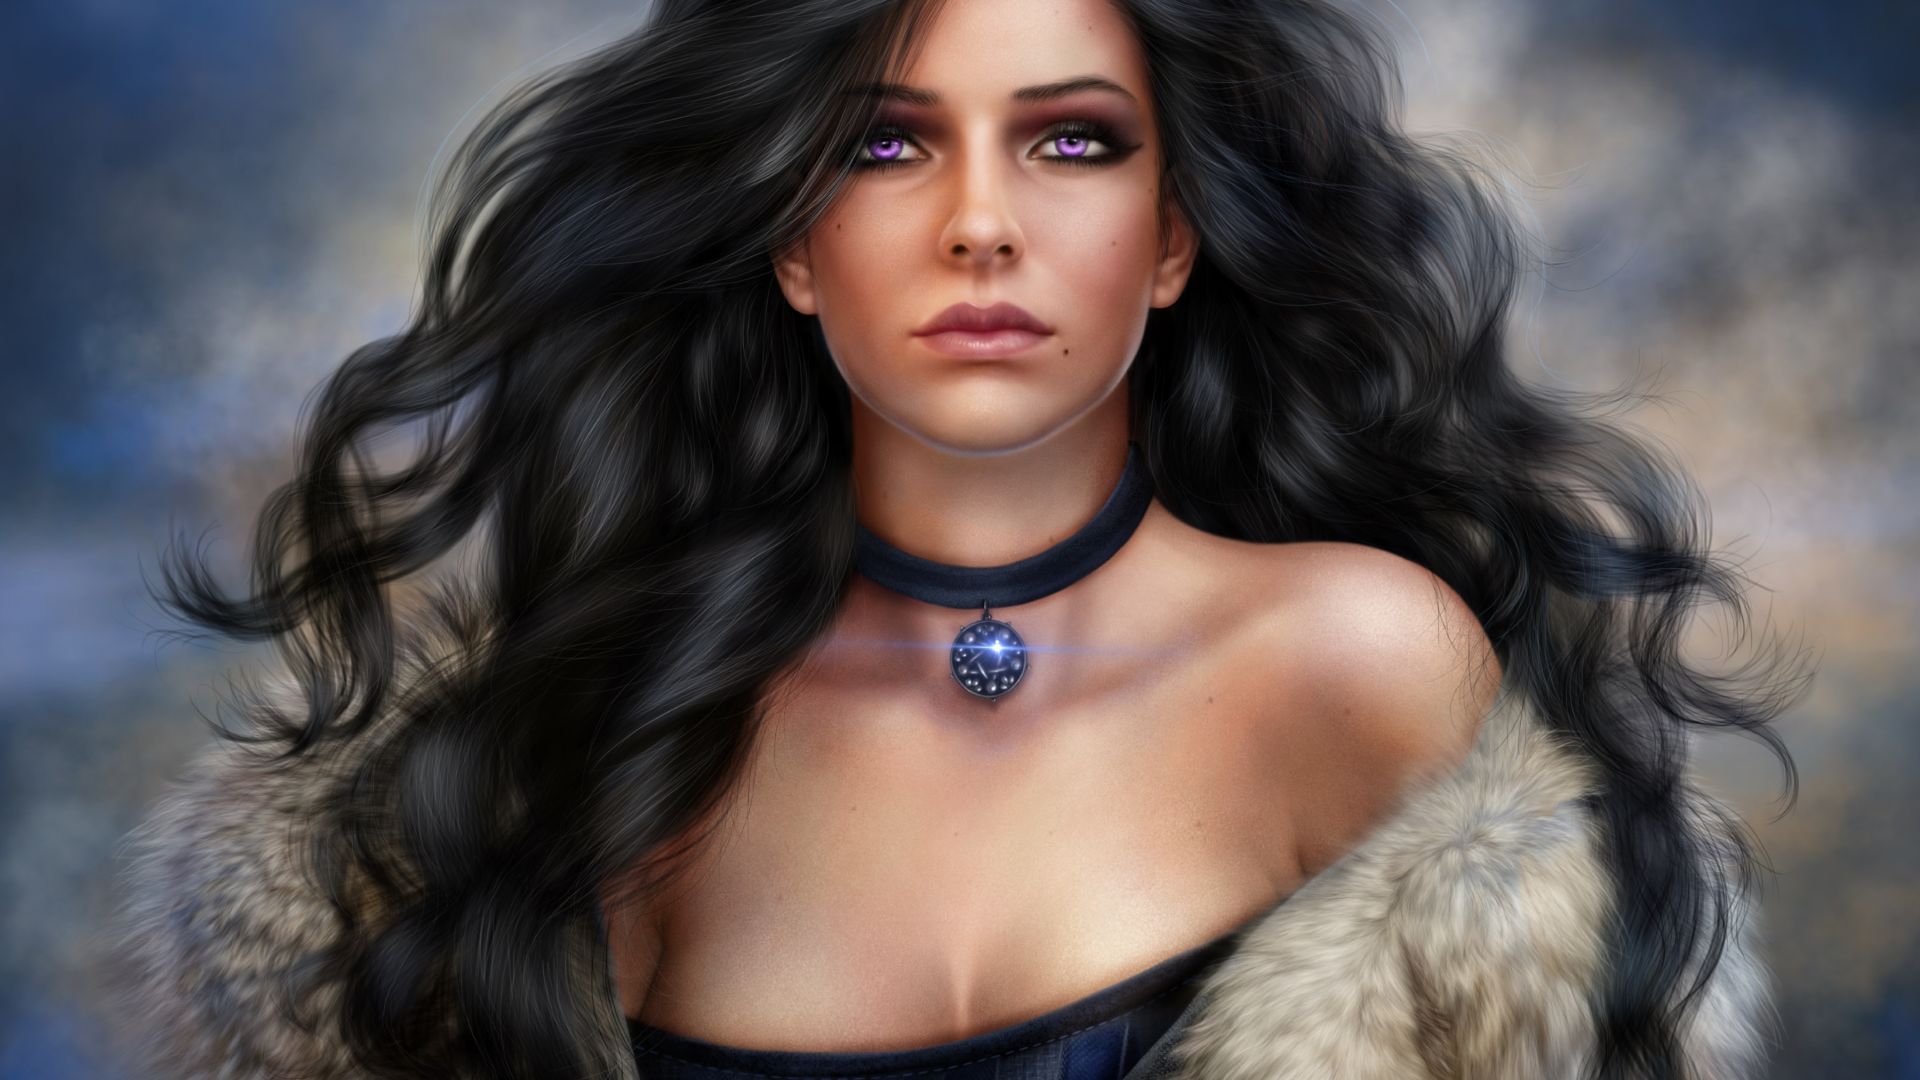 Wallpaper Yennefer, The witcher video game